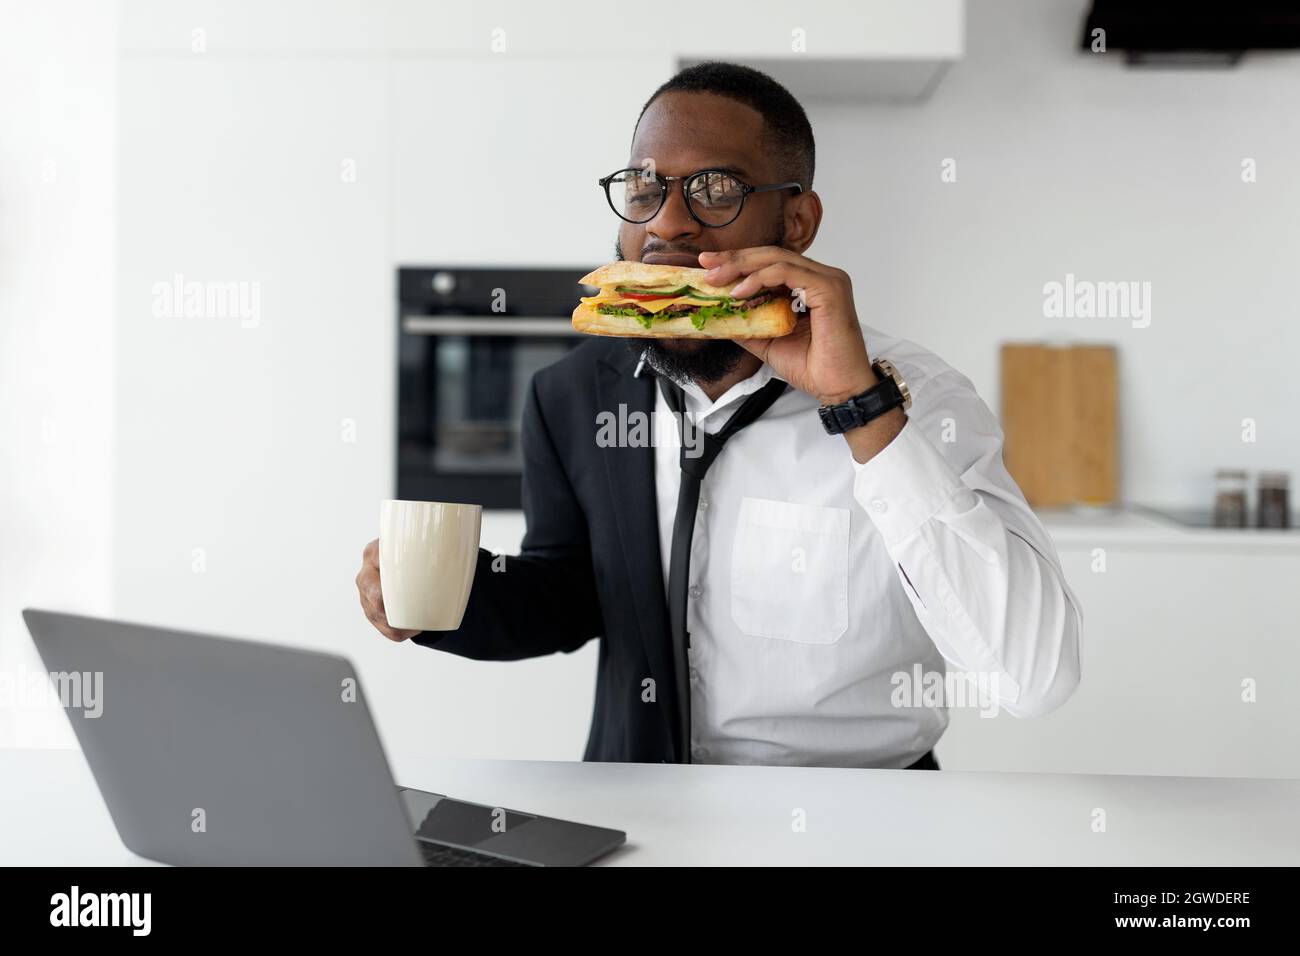 Modern Busy Lifestyle. Portrait of African male in eyeglasses having breakfast in kitchen at home, wearing suit and drinking coffee while eating sandw Stock Photo